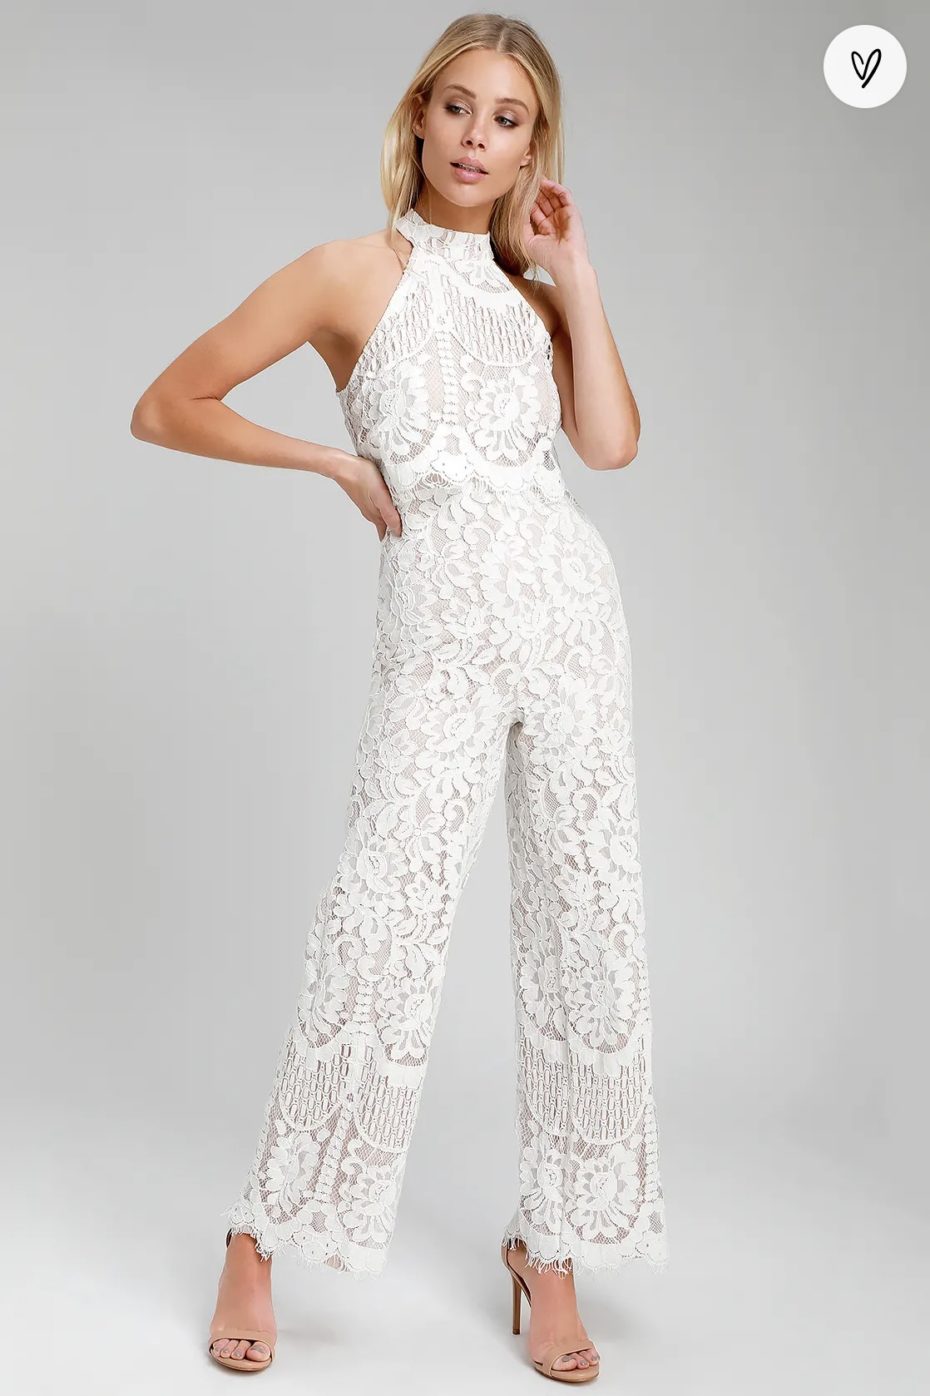 Bride wearing white lace jumpsuit from Lulus